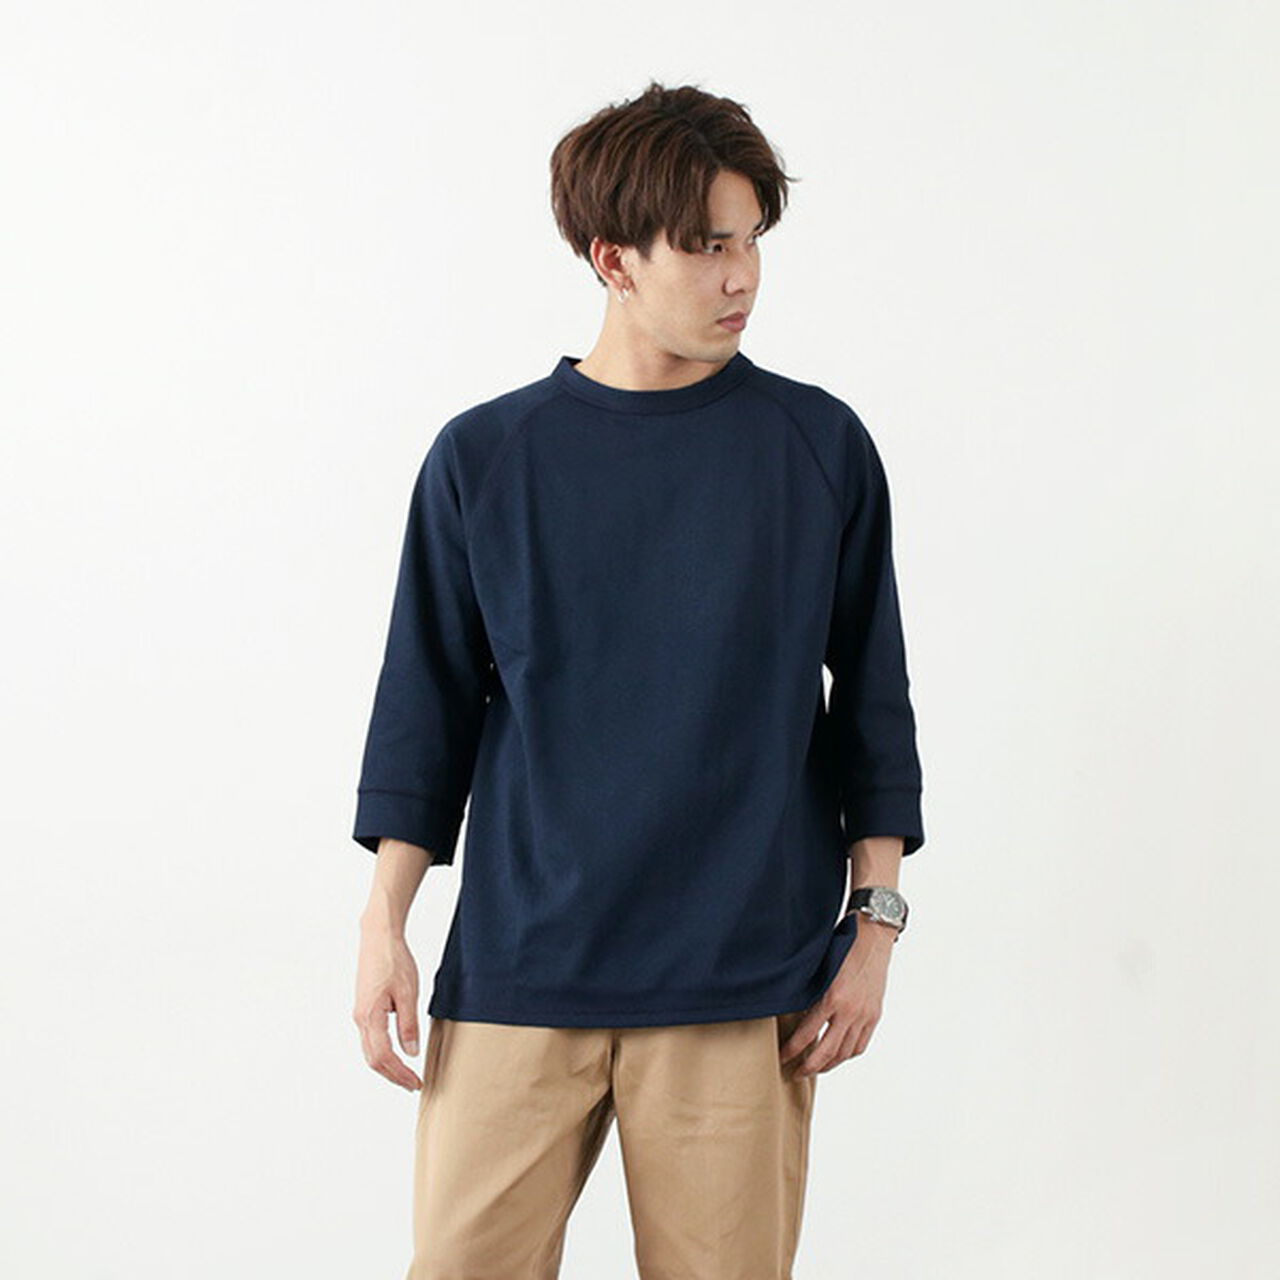 Hemmed Jersey Cotton Crew Neck Cut & Sew,Navy, large image number 0